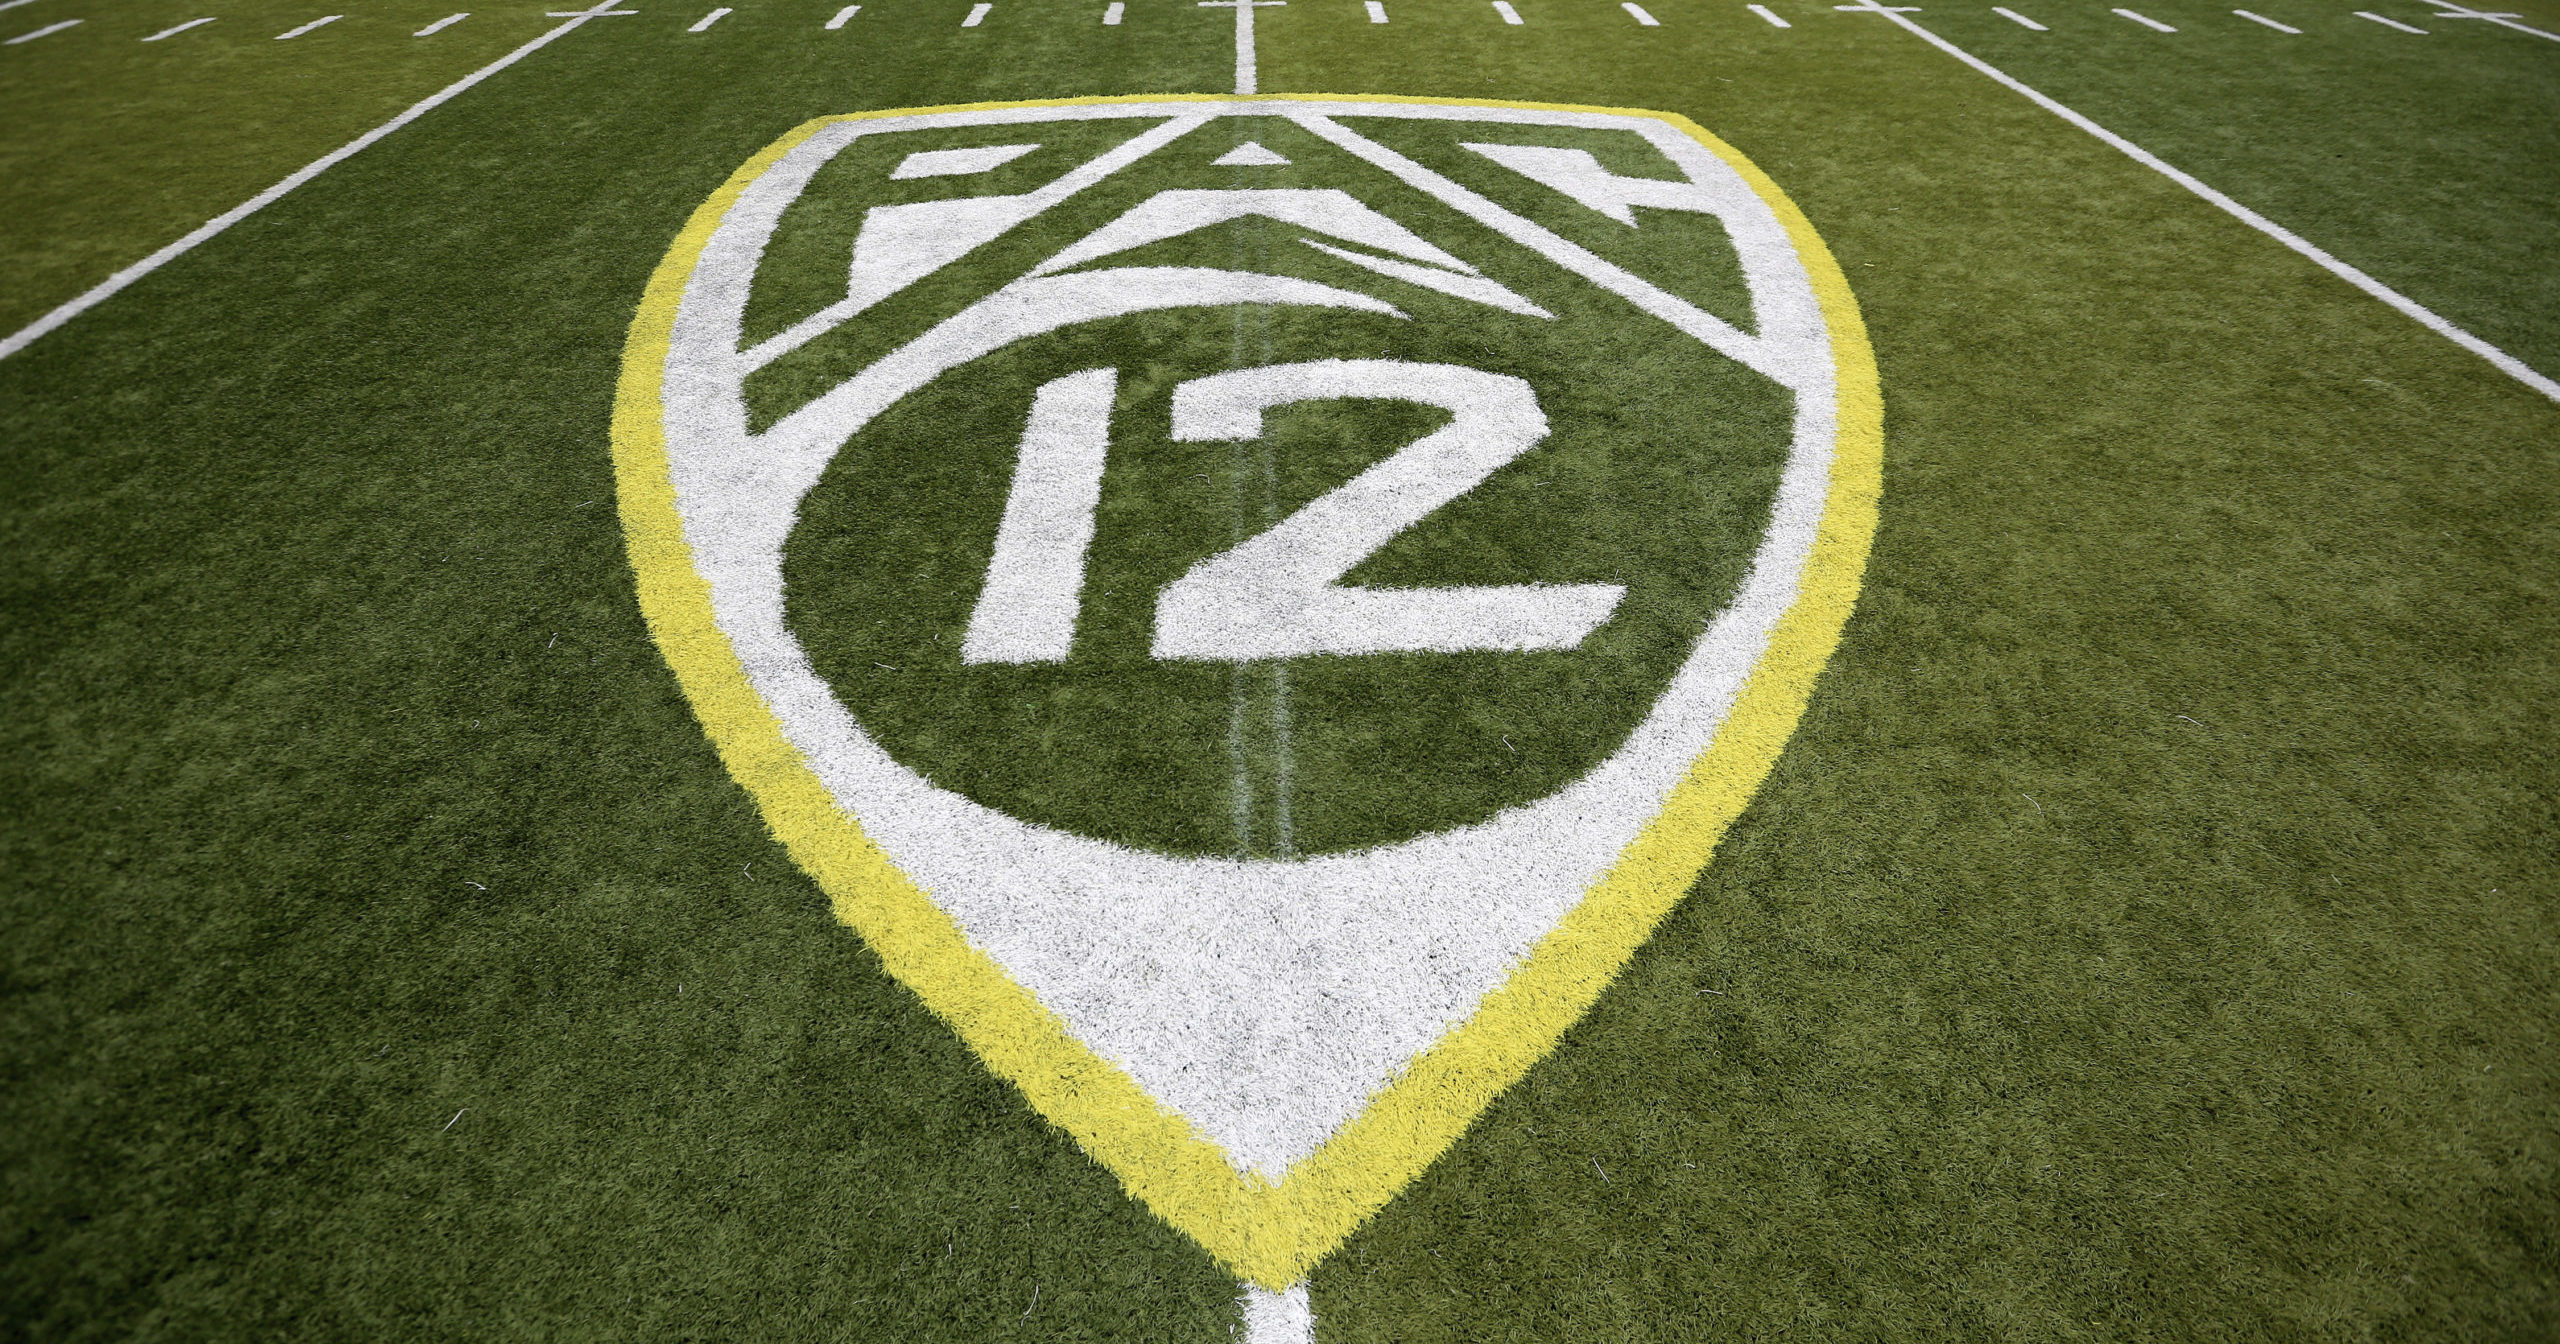 In this Oct. 10, 2015, file photo, a Pac-12 logo is displayed on the field before an NCAA college football game between Washington State and Oregon in Eugene, Oregon.